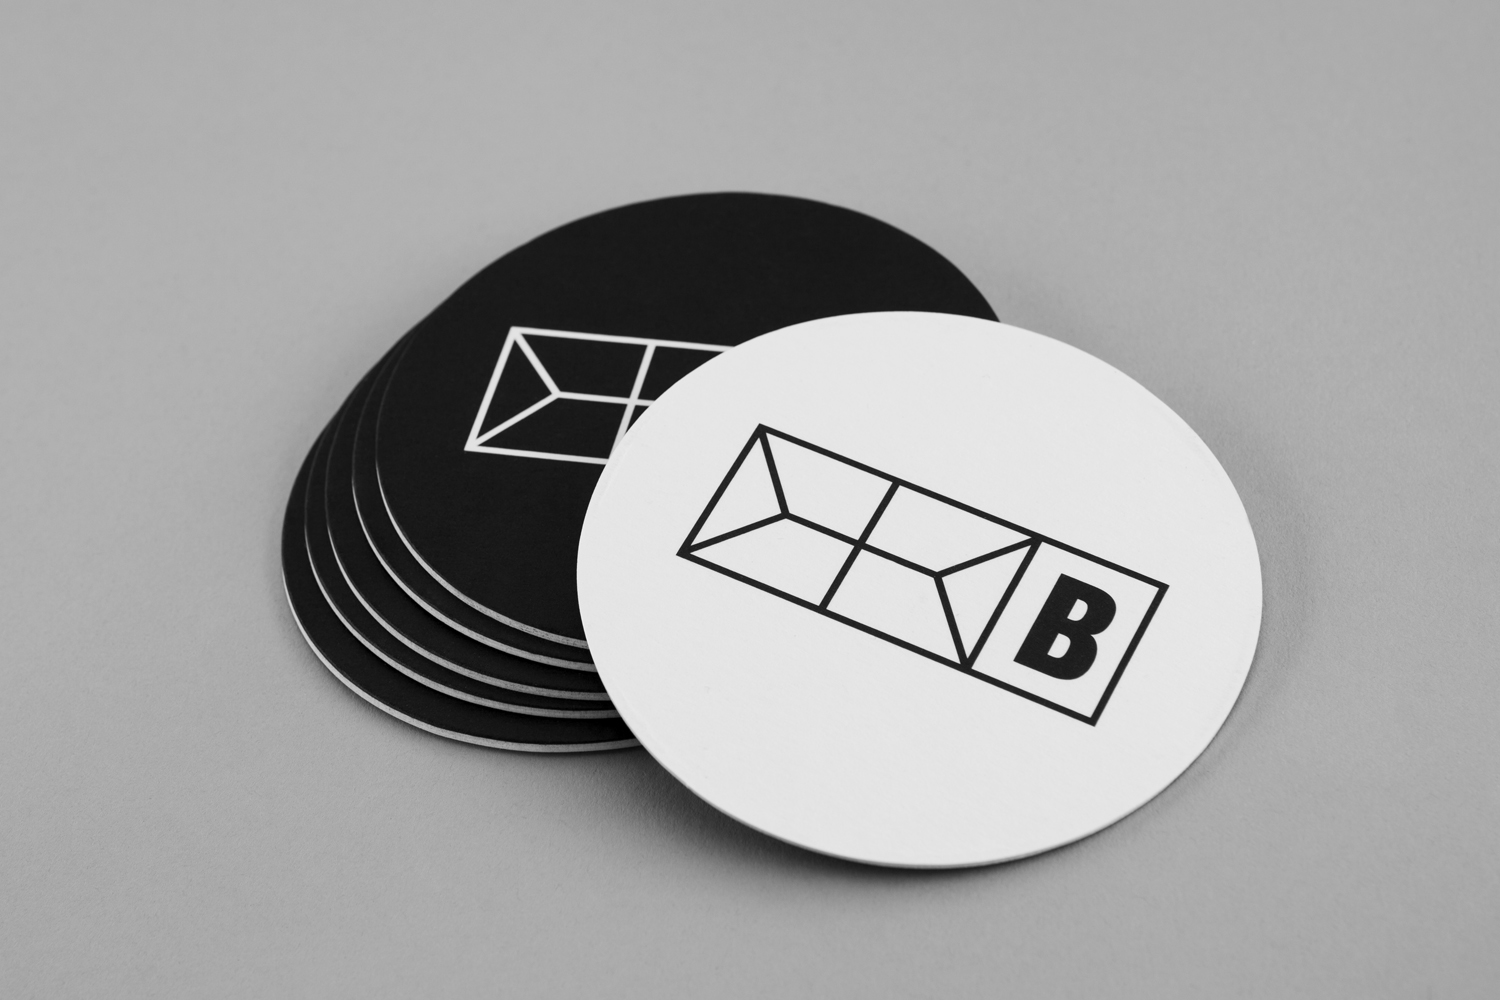 Visual identity and coasters designed by Blok for Toronto's The Broadview Hotel